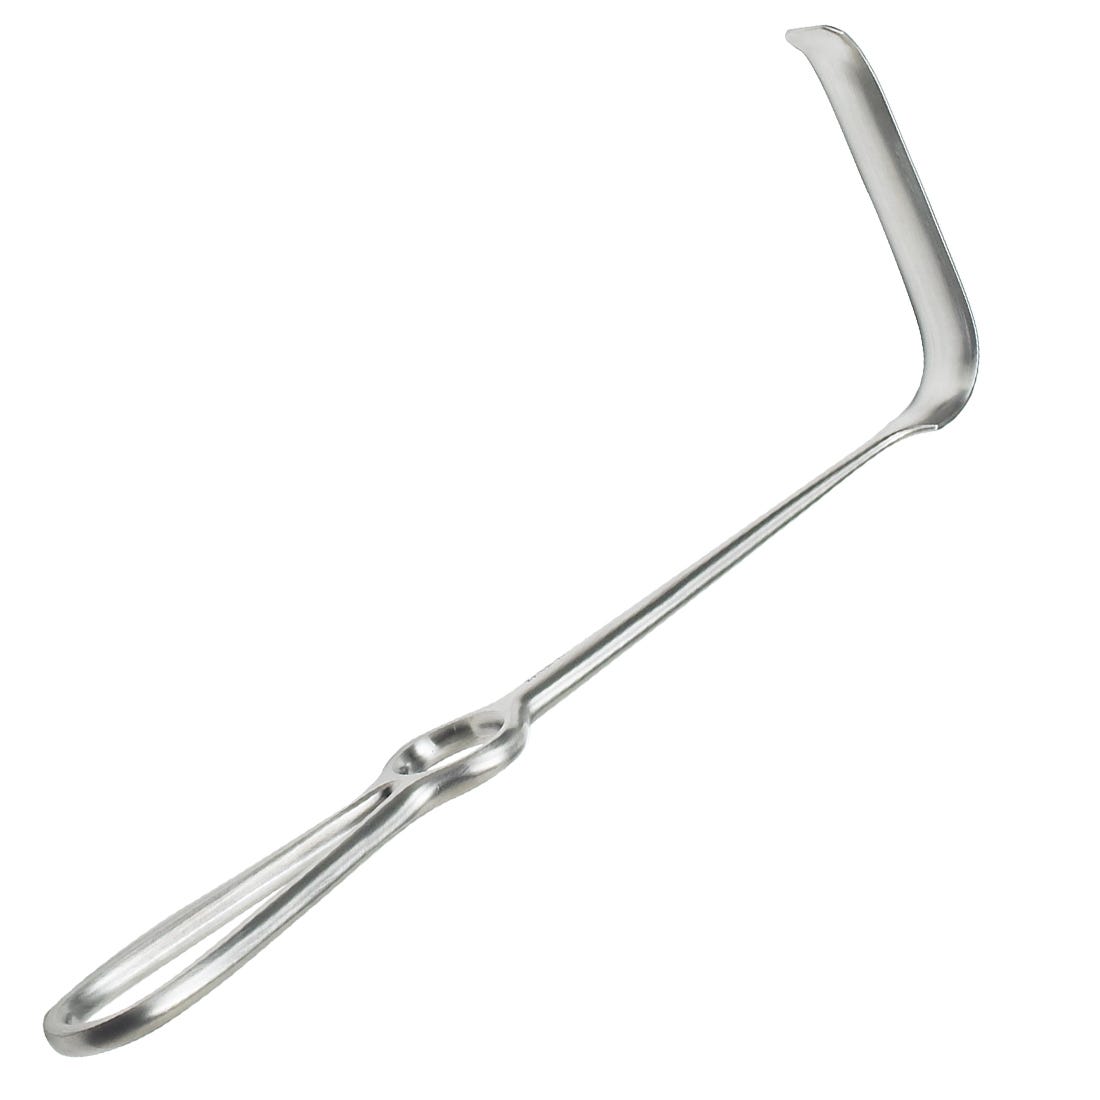 Obwegeser Type Surgical Retractor Concave, Curved Down, 14mm x 70mm